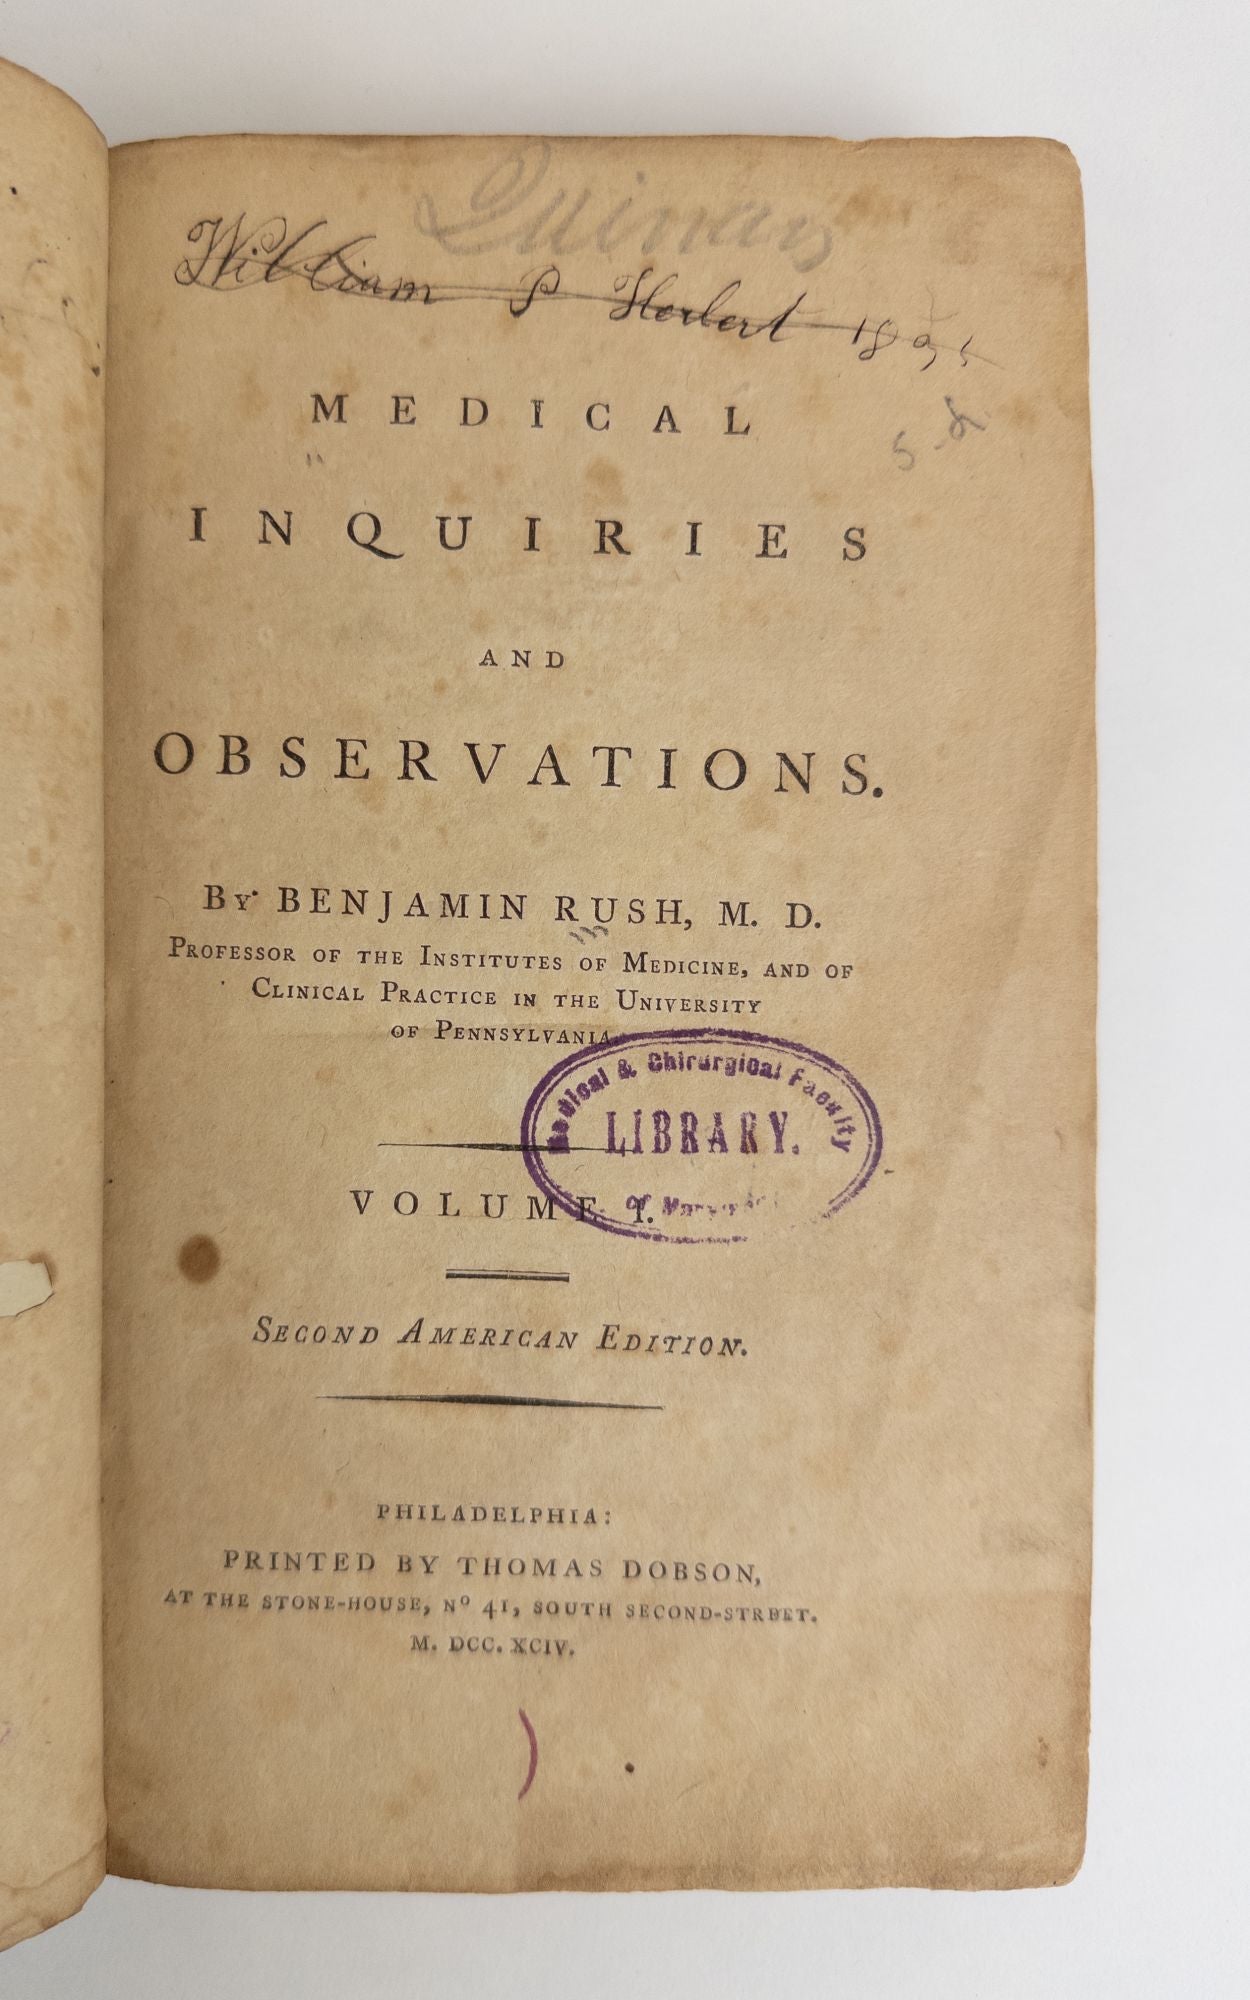 Product Image for MEDICAL INQUIRIES AND OBSERVATIONS [Five Volumes]